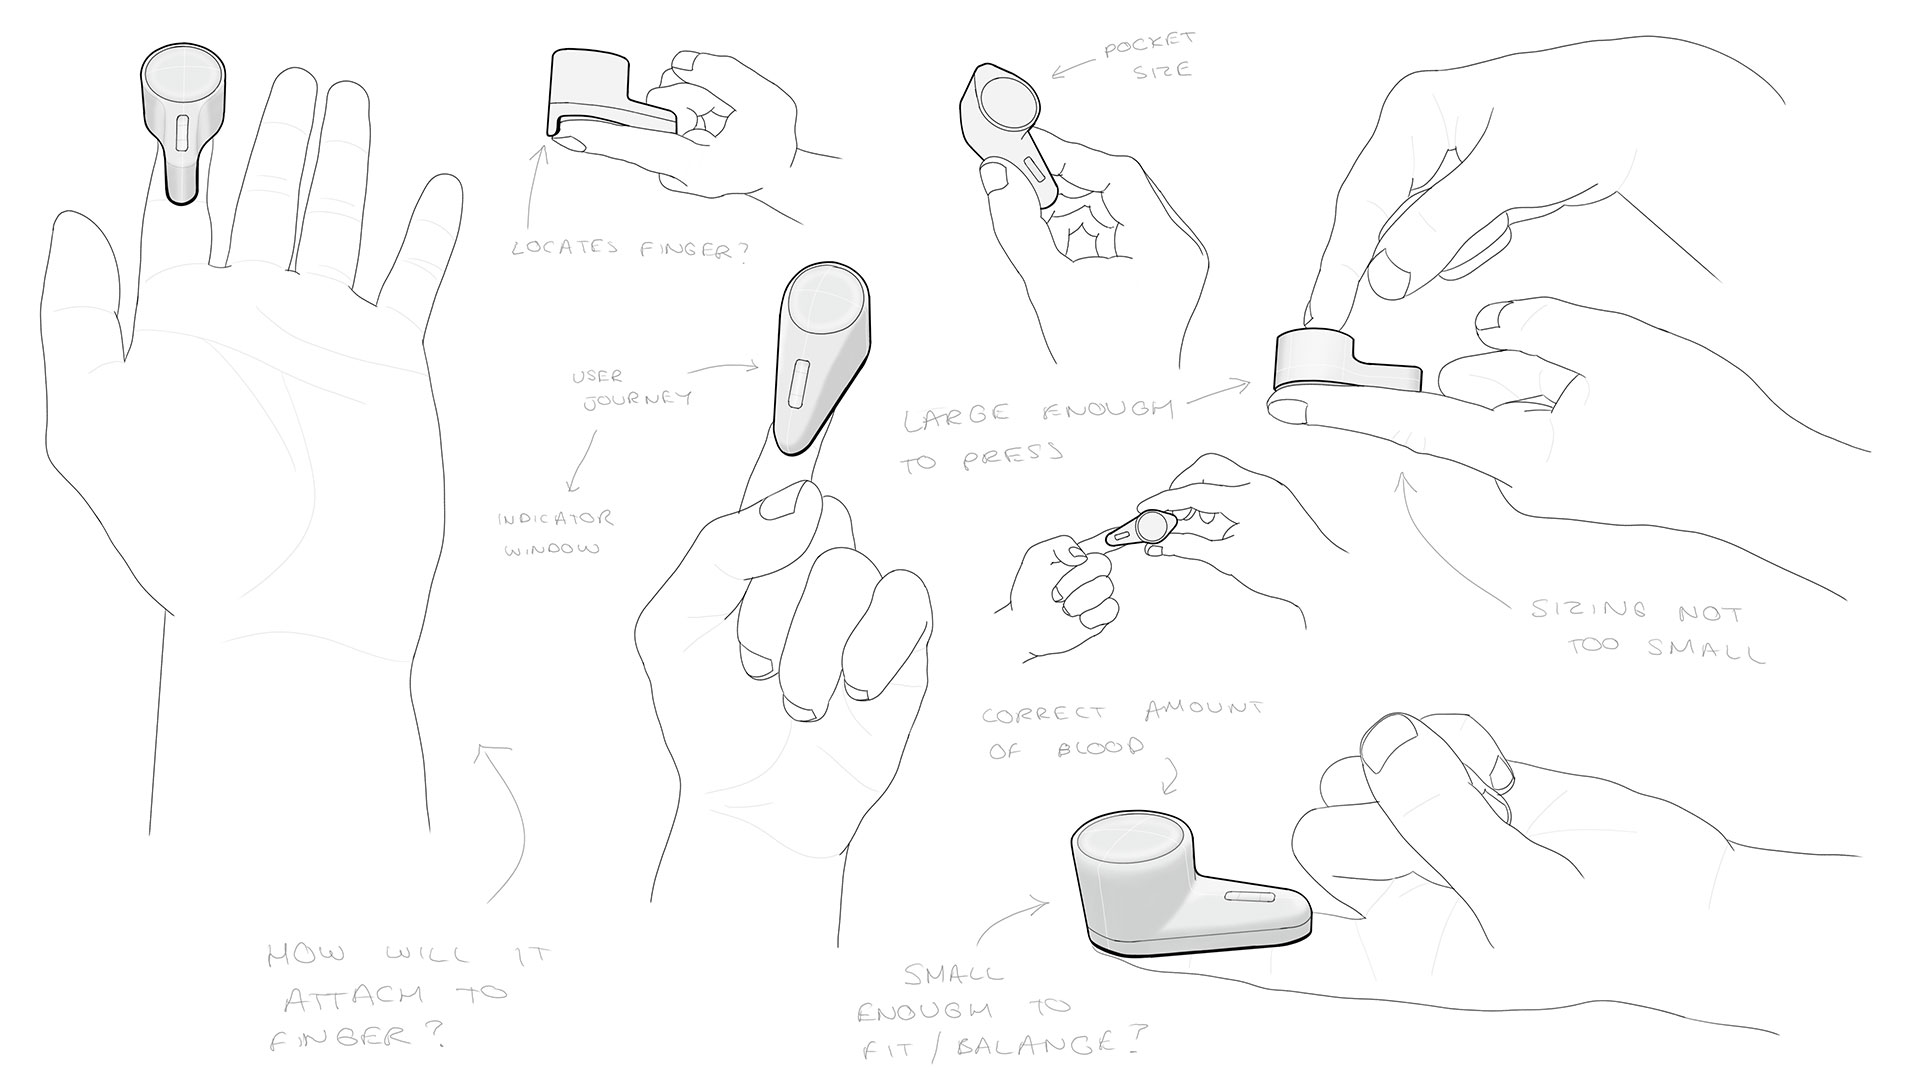 Sketches of Catch HIV detector with hands